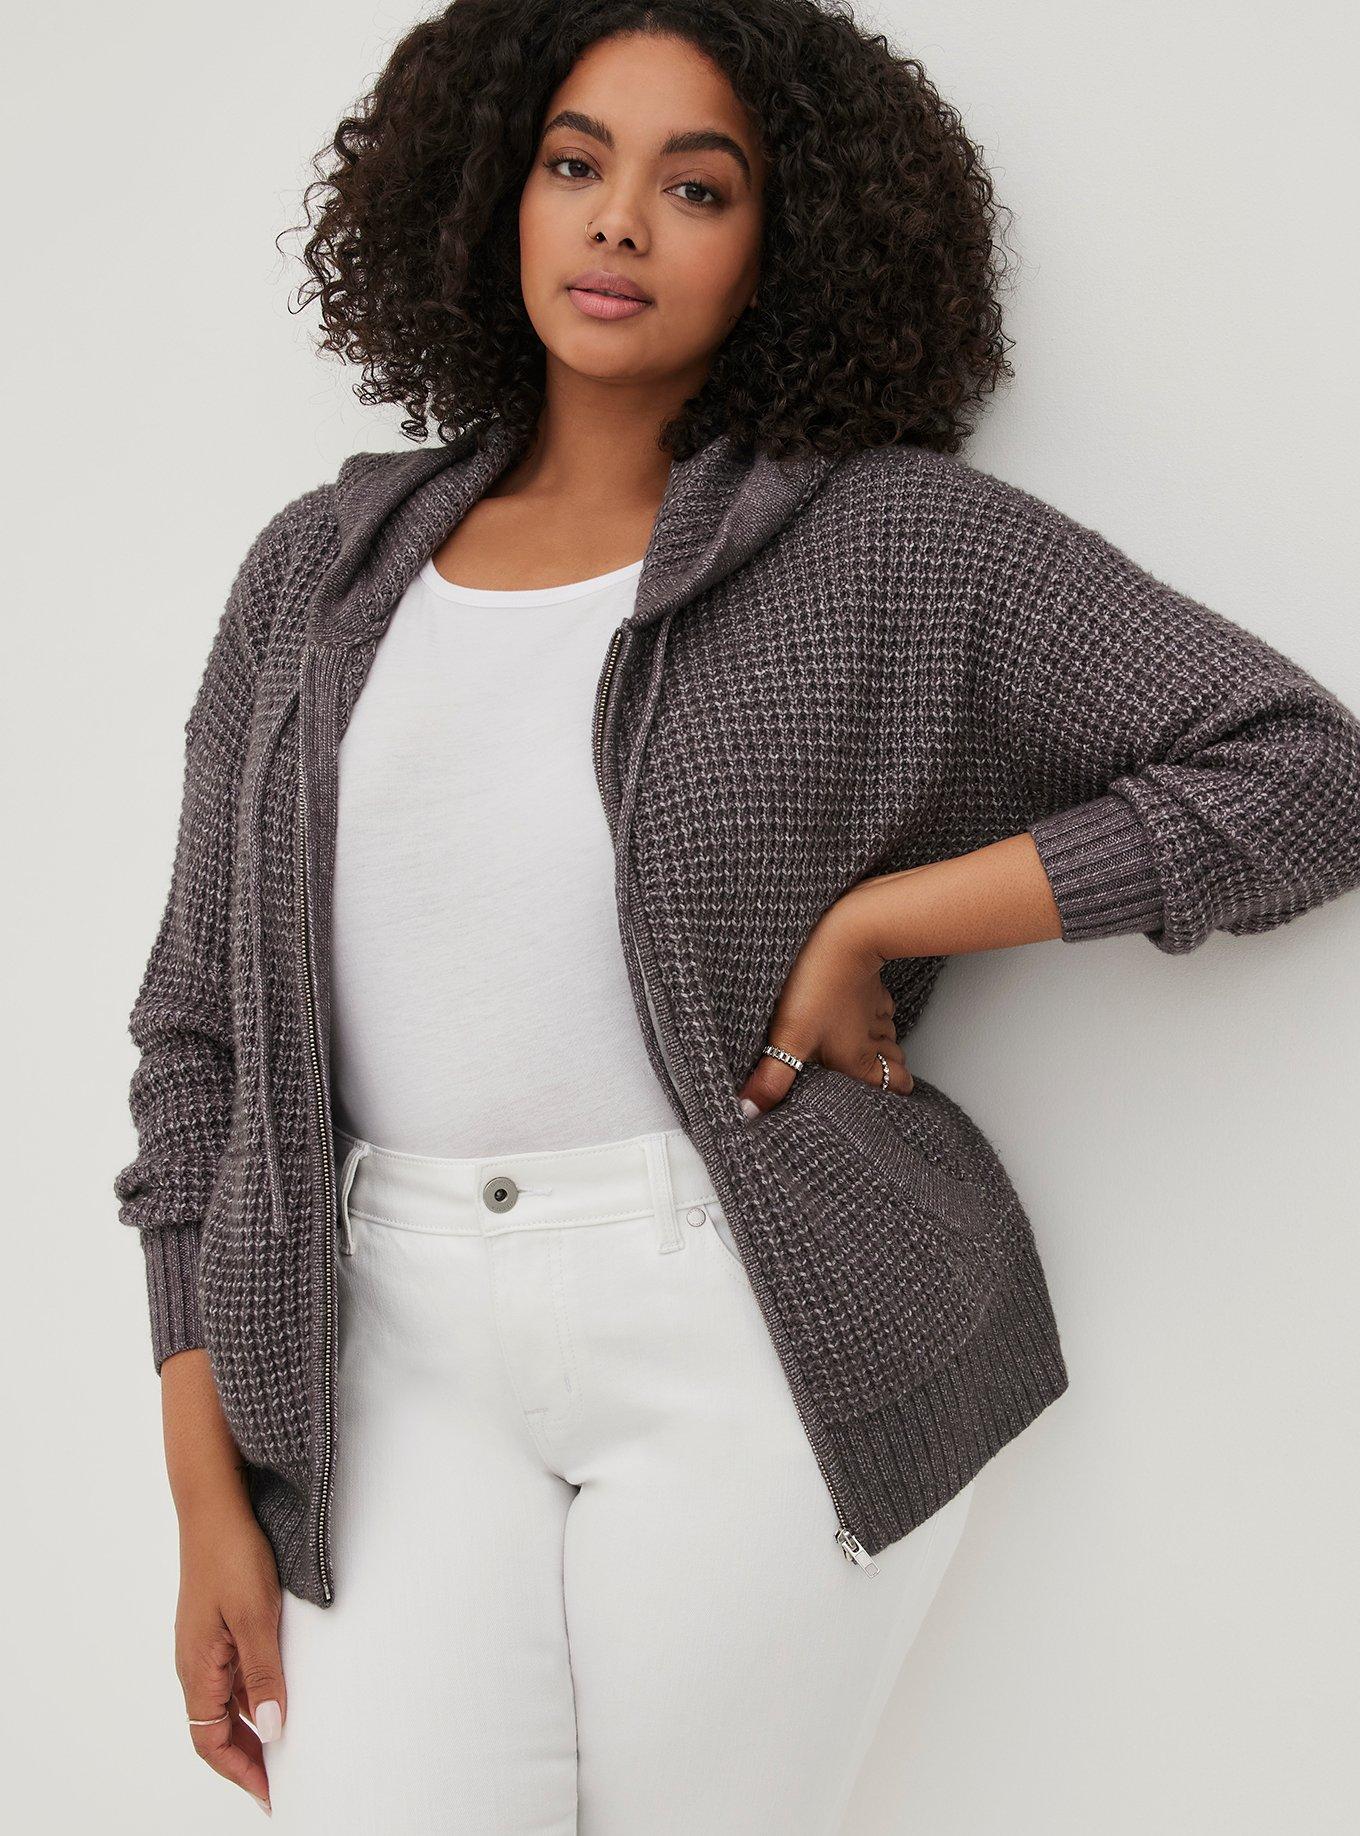 15 best cardigans for women in every style and budget